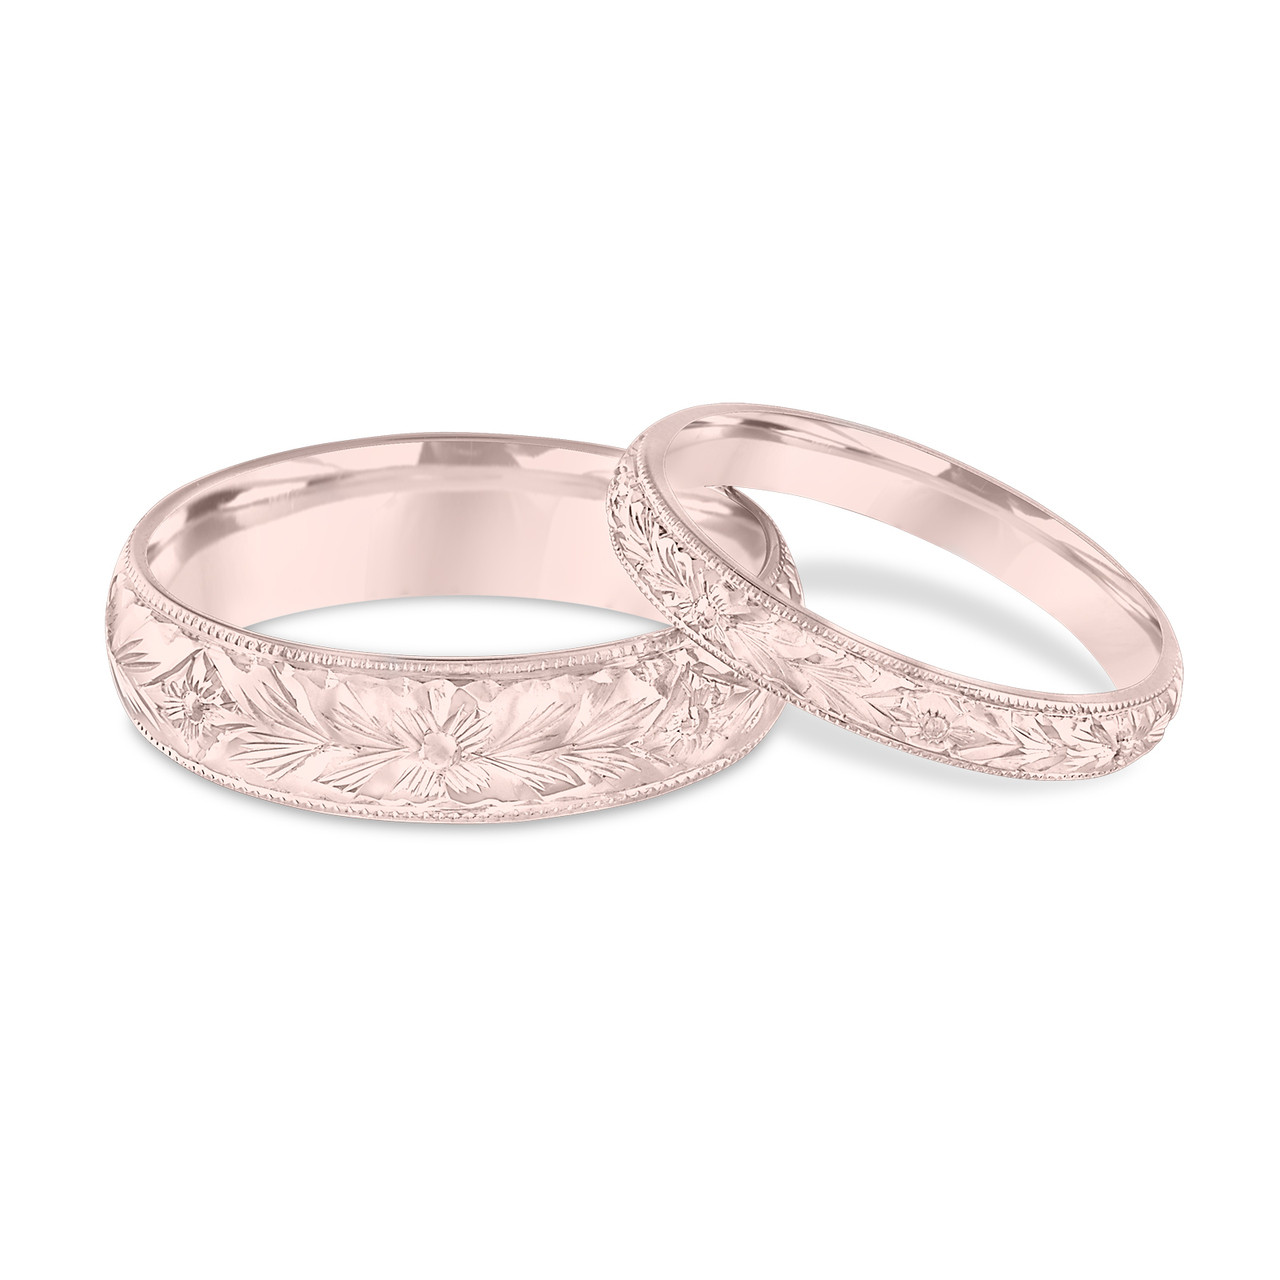 Unique Wedding Band Sets His And Hers
 His & Hers Wedding Bands Hand Engraved Wedding Bands